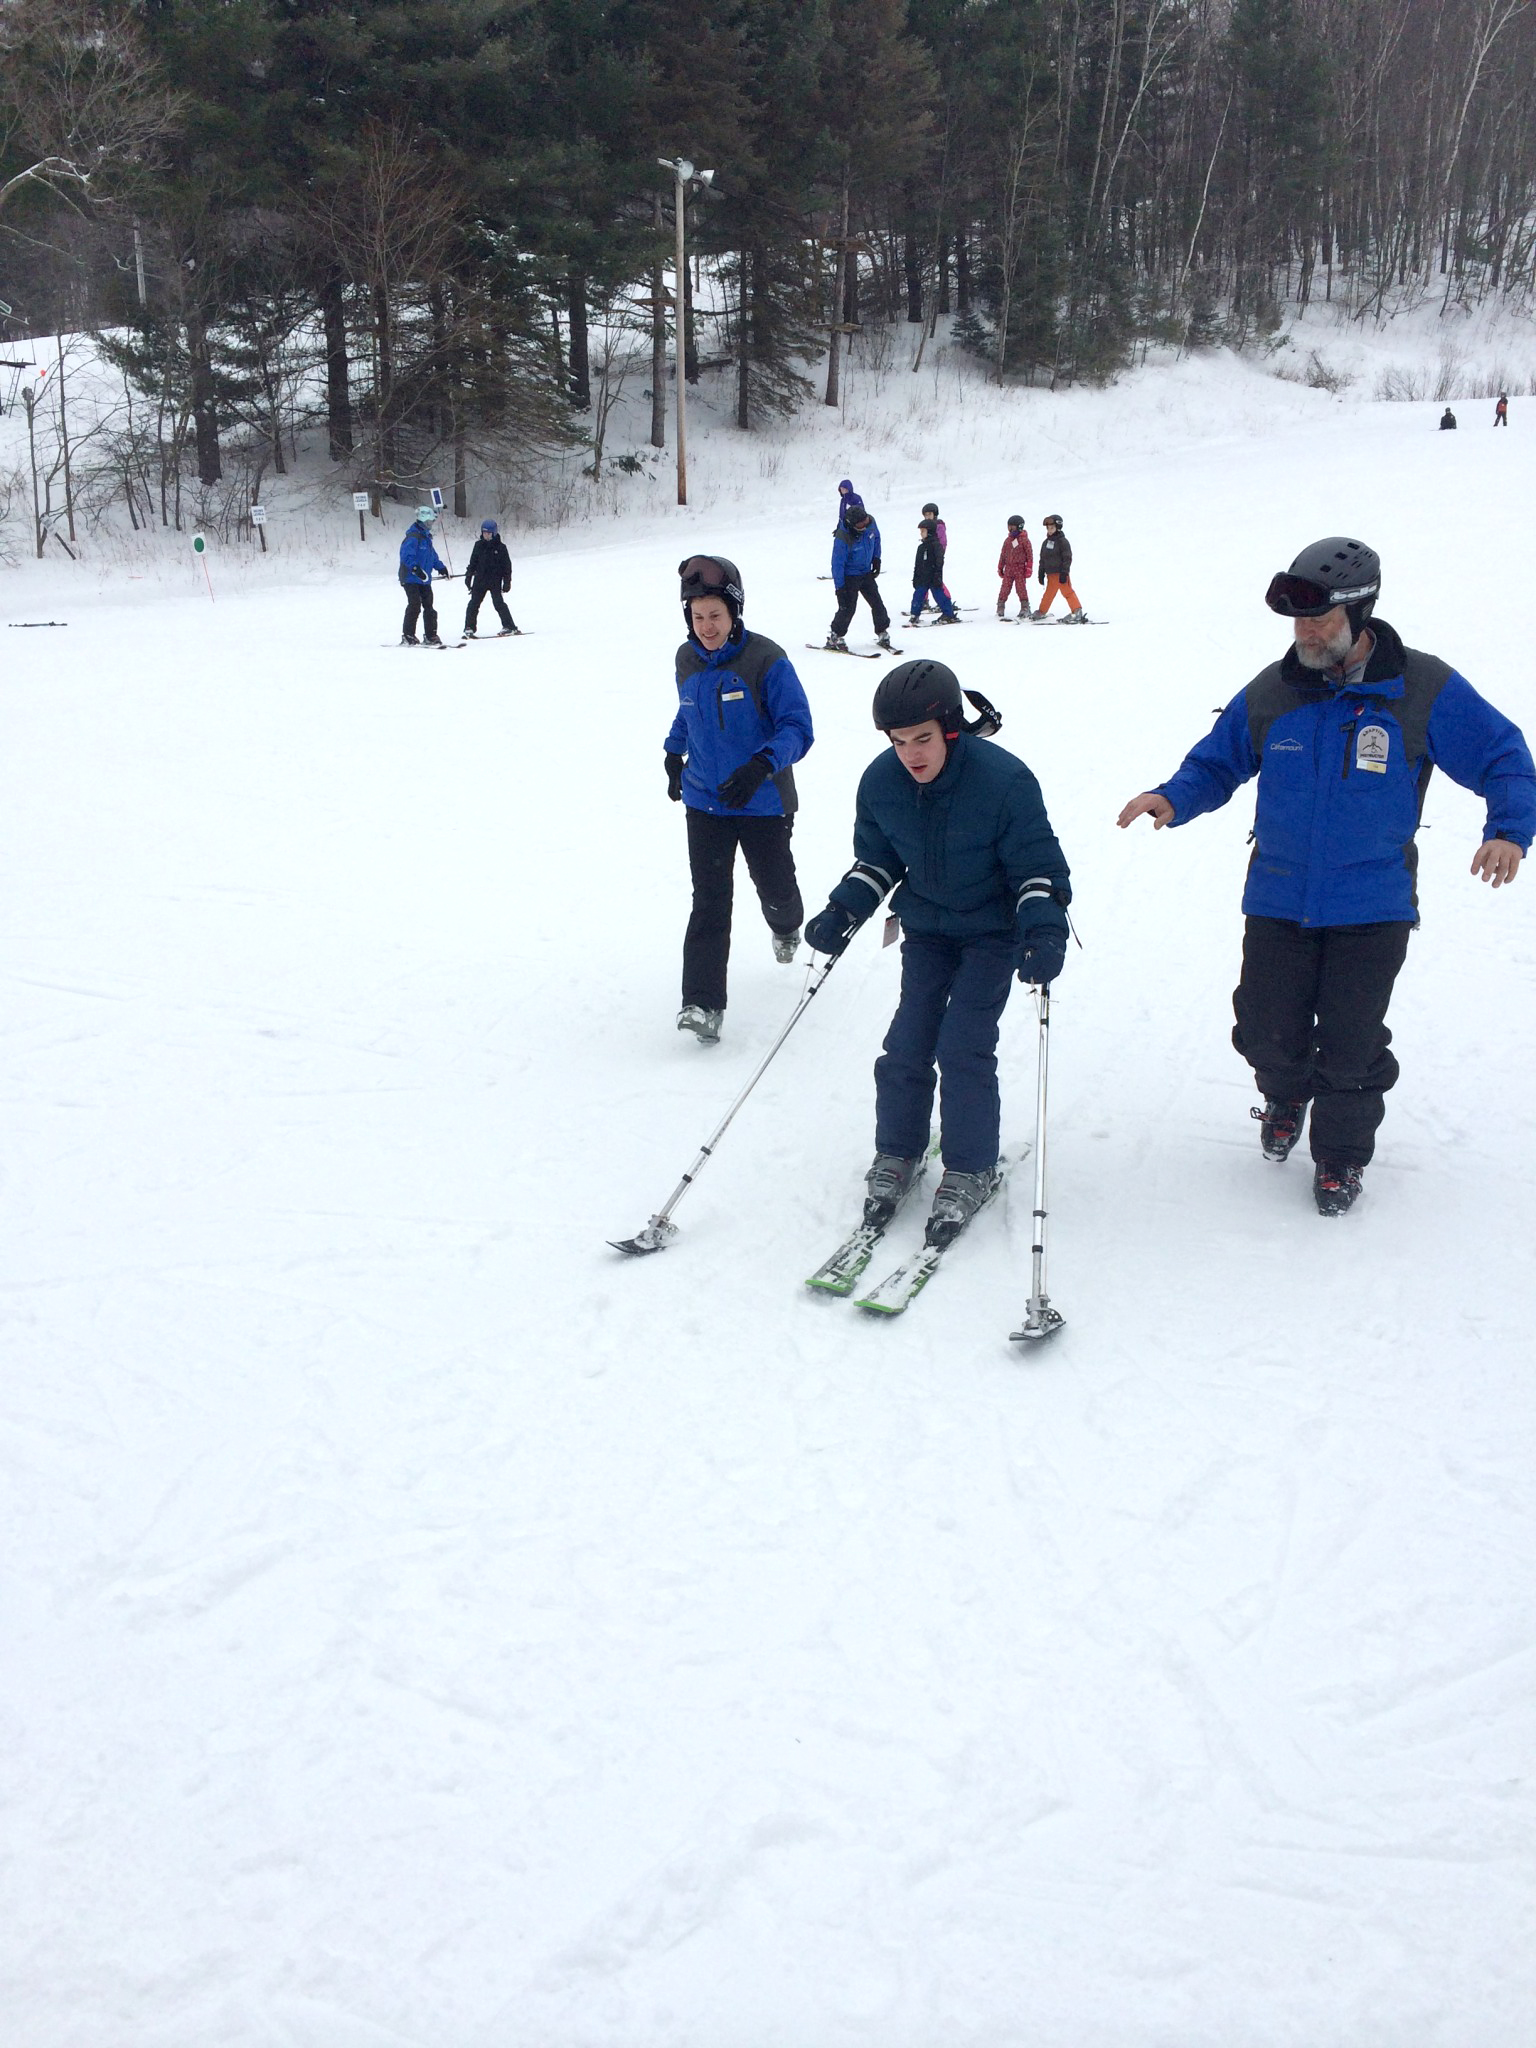 PHOTO: Andrew Vella, 16, has cerebral palsy and went skiing for the first time as part of NYU Langone’s new Adaptive Skiing Program.